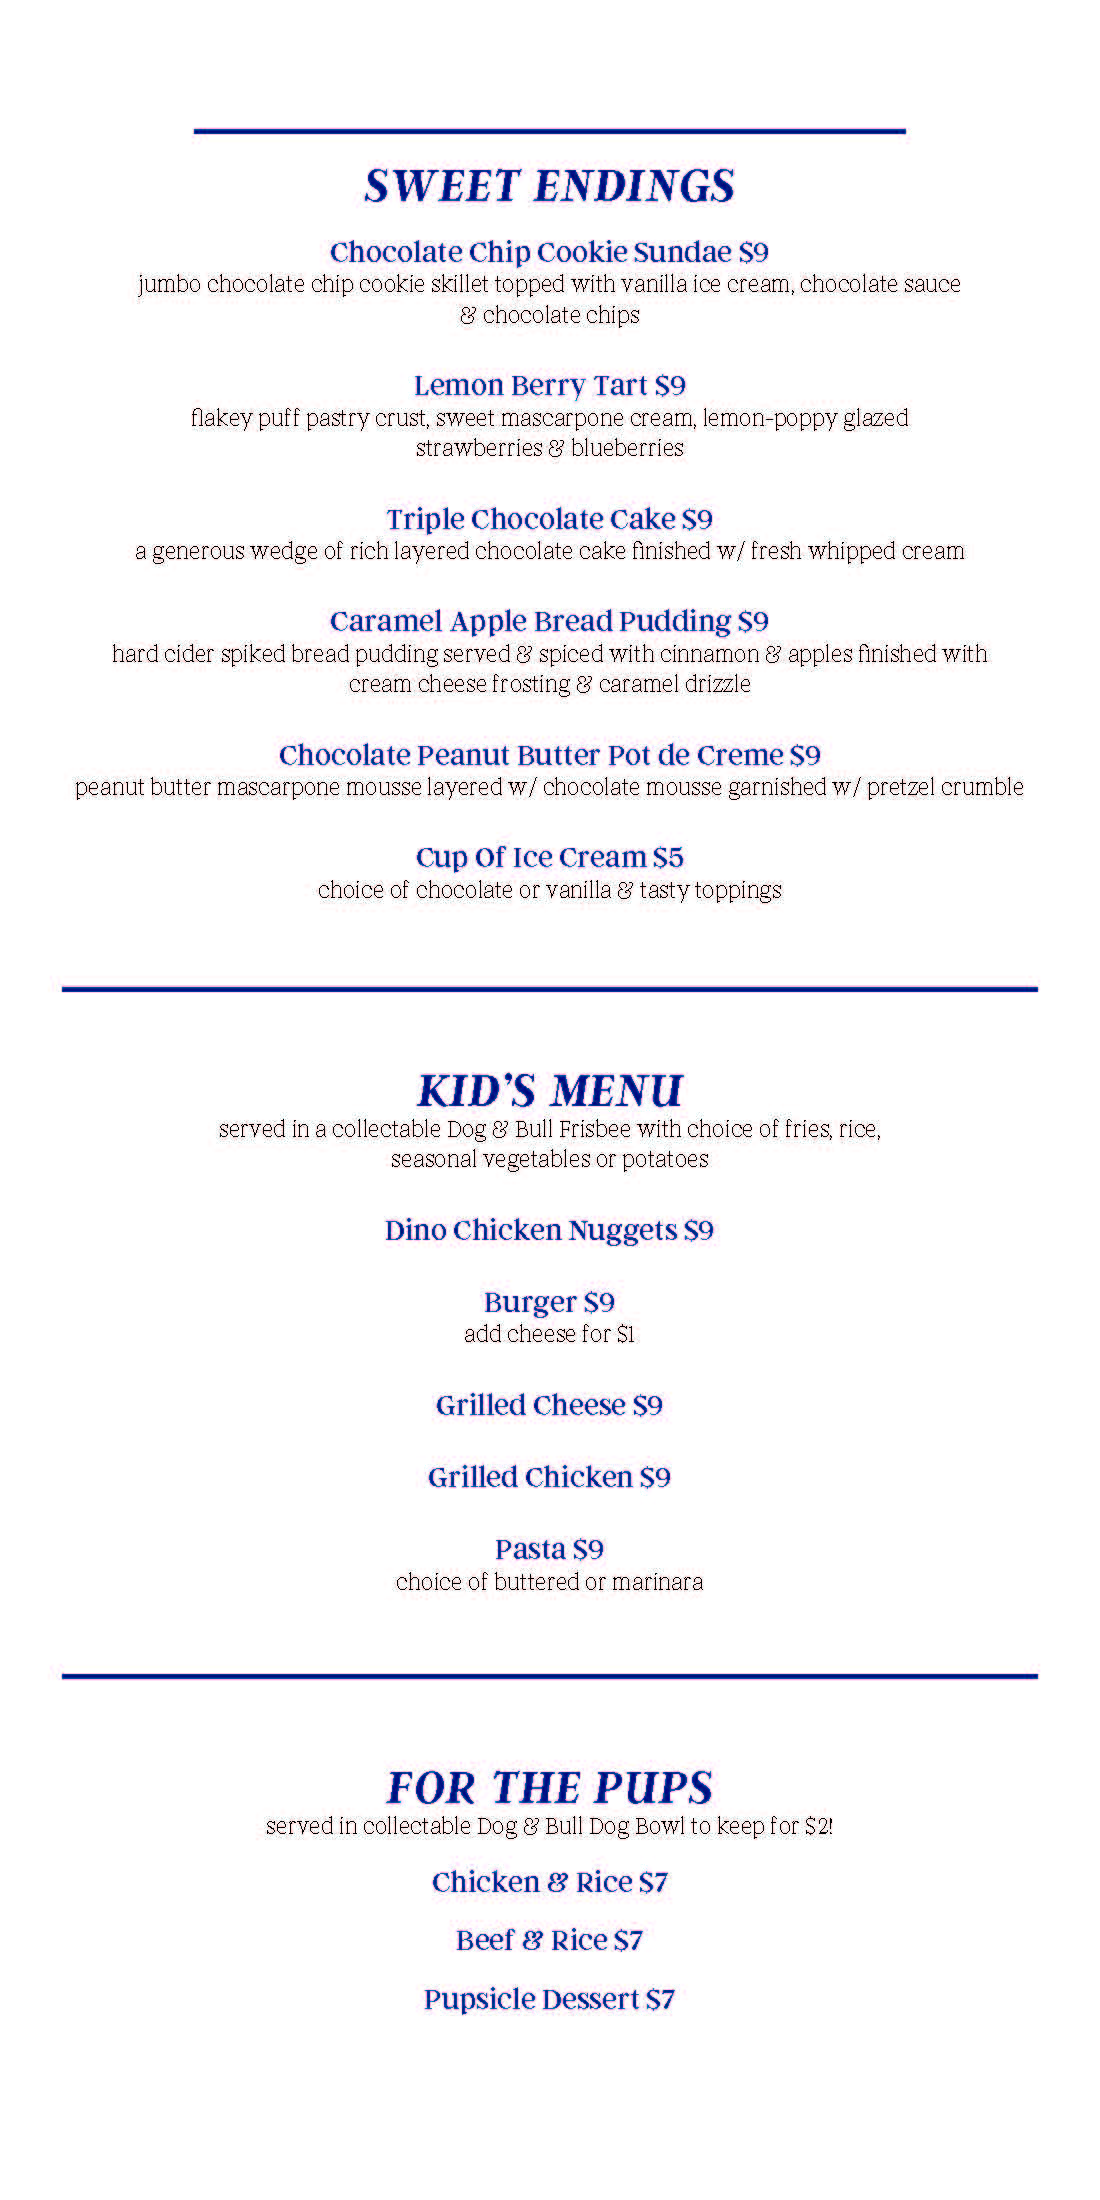 A menu includes sections for "Sweet Endings," featuring desserts like Chocolate Chip Cookie Sundae, "Kid's Menu" with options like Dino Chicken Nuggets, and "For The Pups" with dishes like Chicken & Rice.